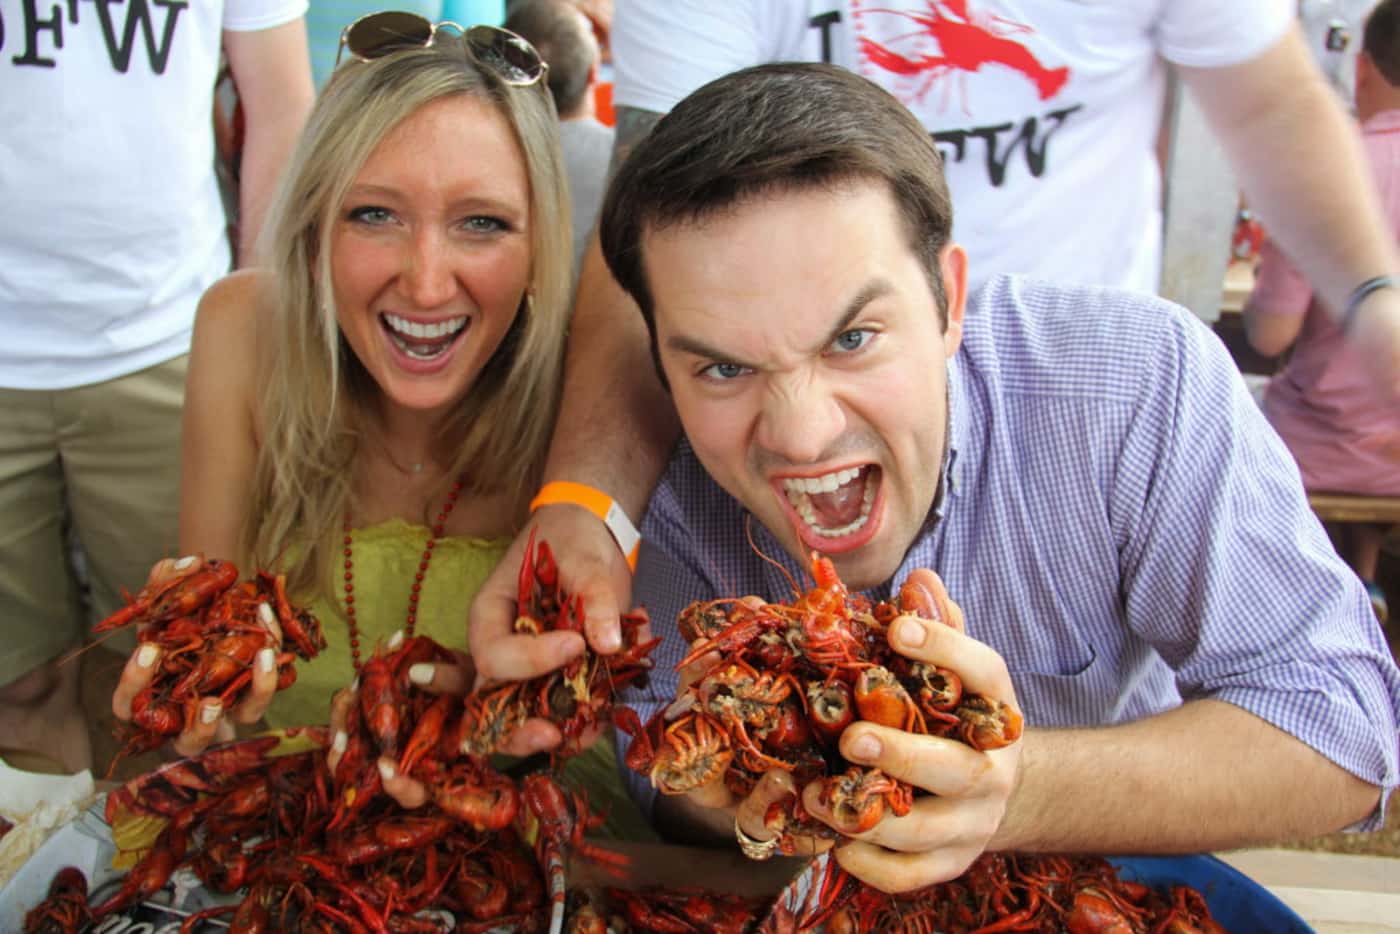 Jessi Moreau and Steven Strobl getting their crawfish on at Boil for the Brave crawfish boil...